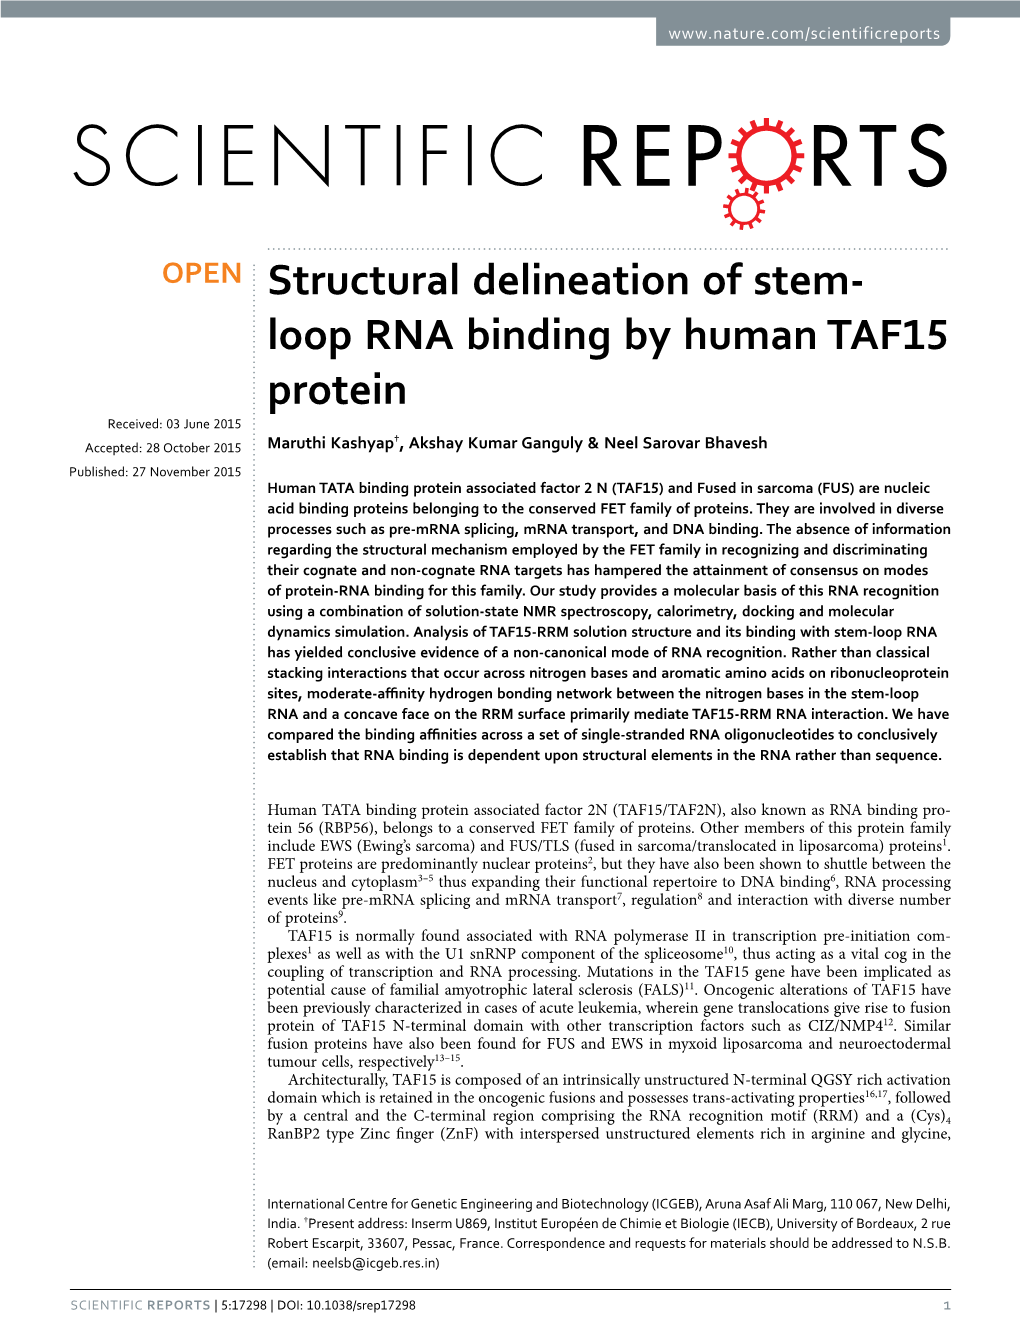 Structural Delineation of Stem-Loop RNA Binding by Human TAF15 Protein